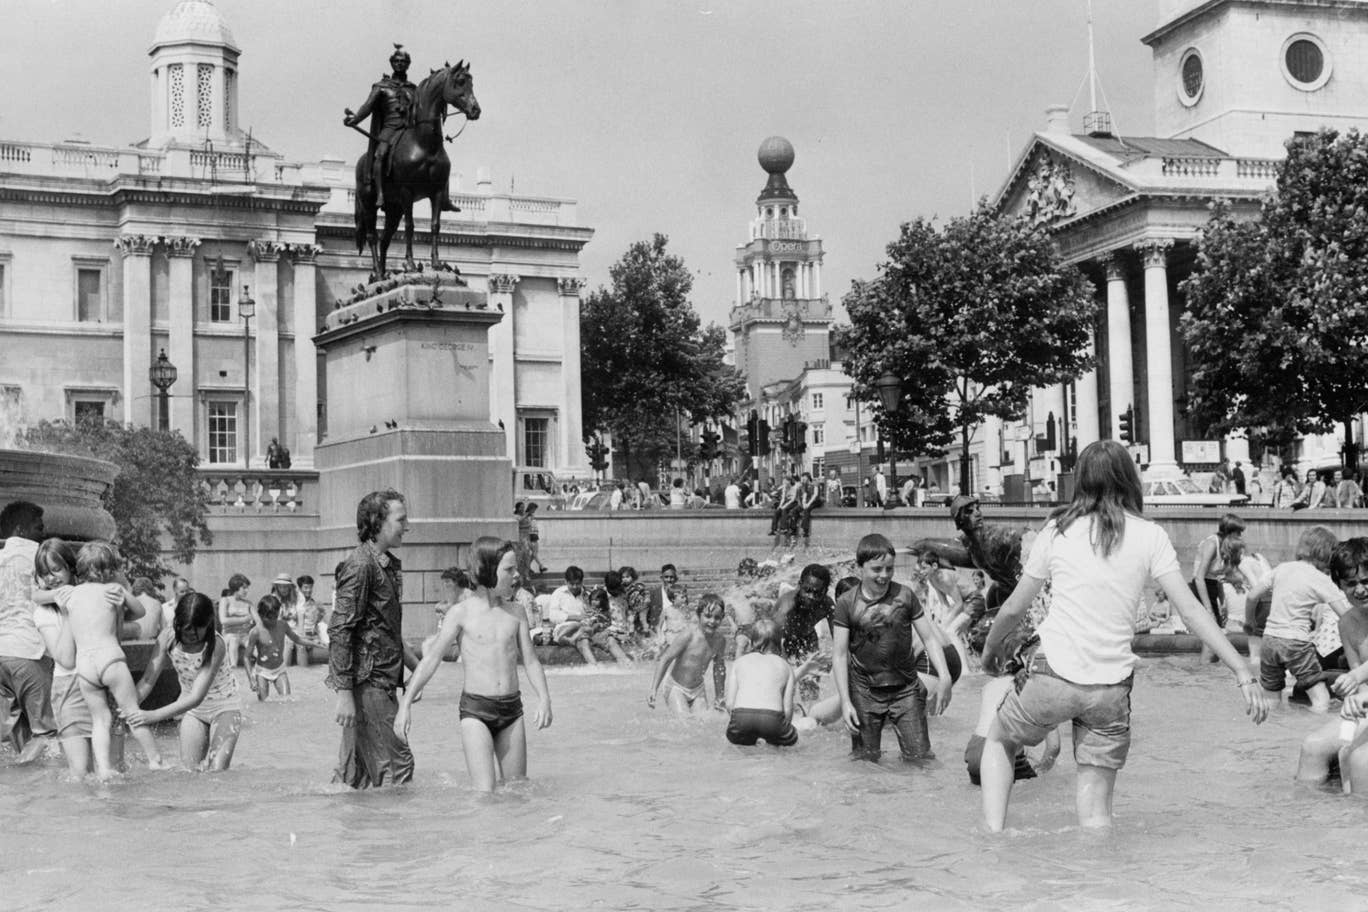 People enjoy the cool water in the fountains at Trafalgar Square